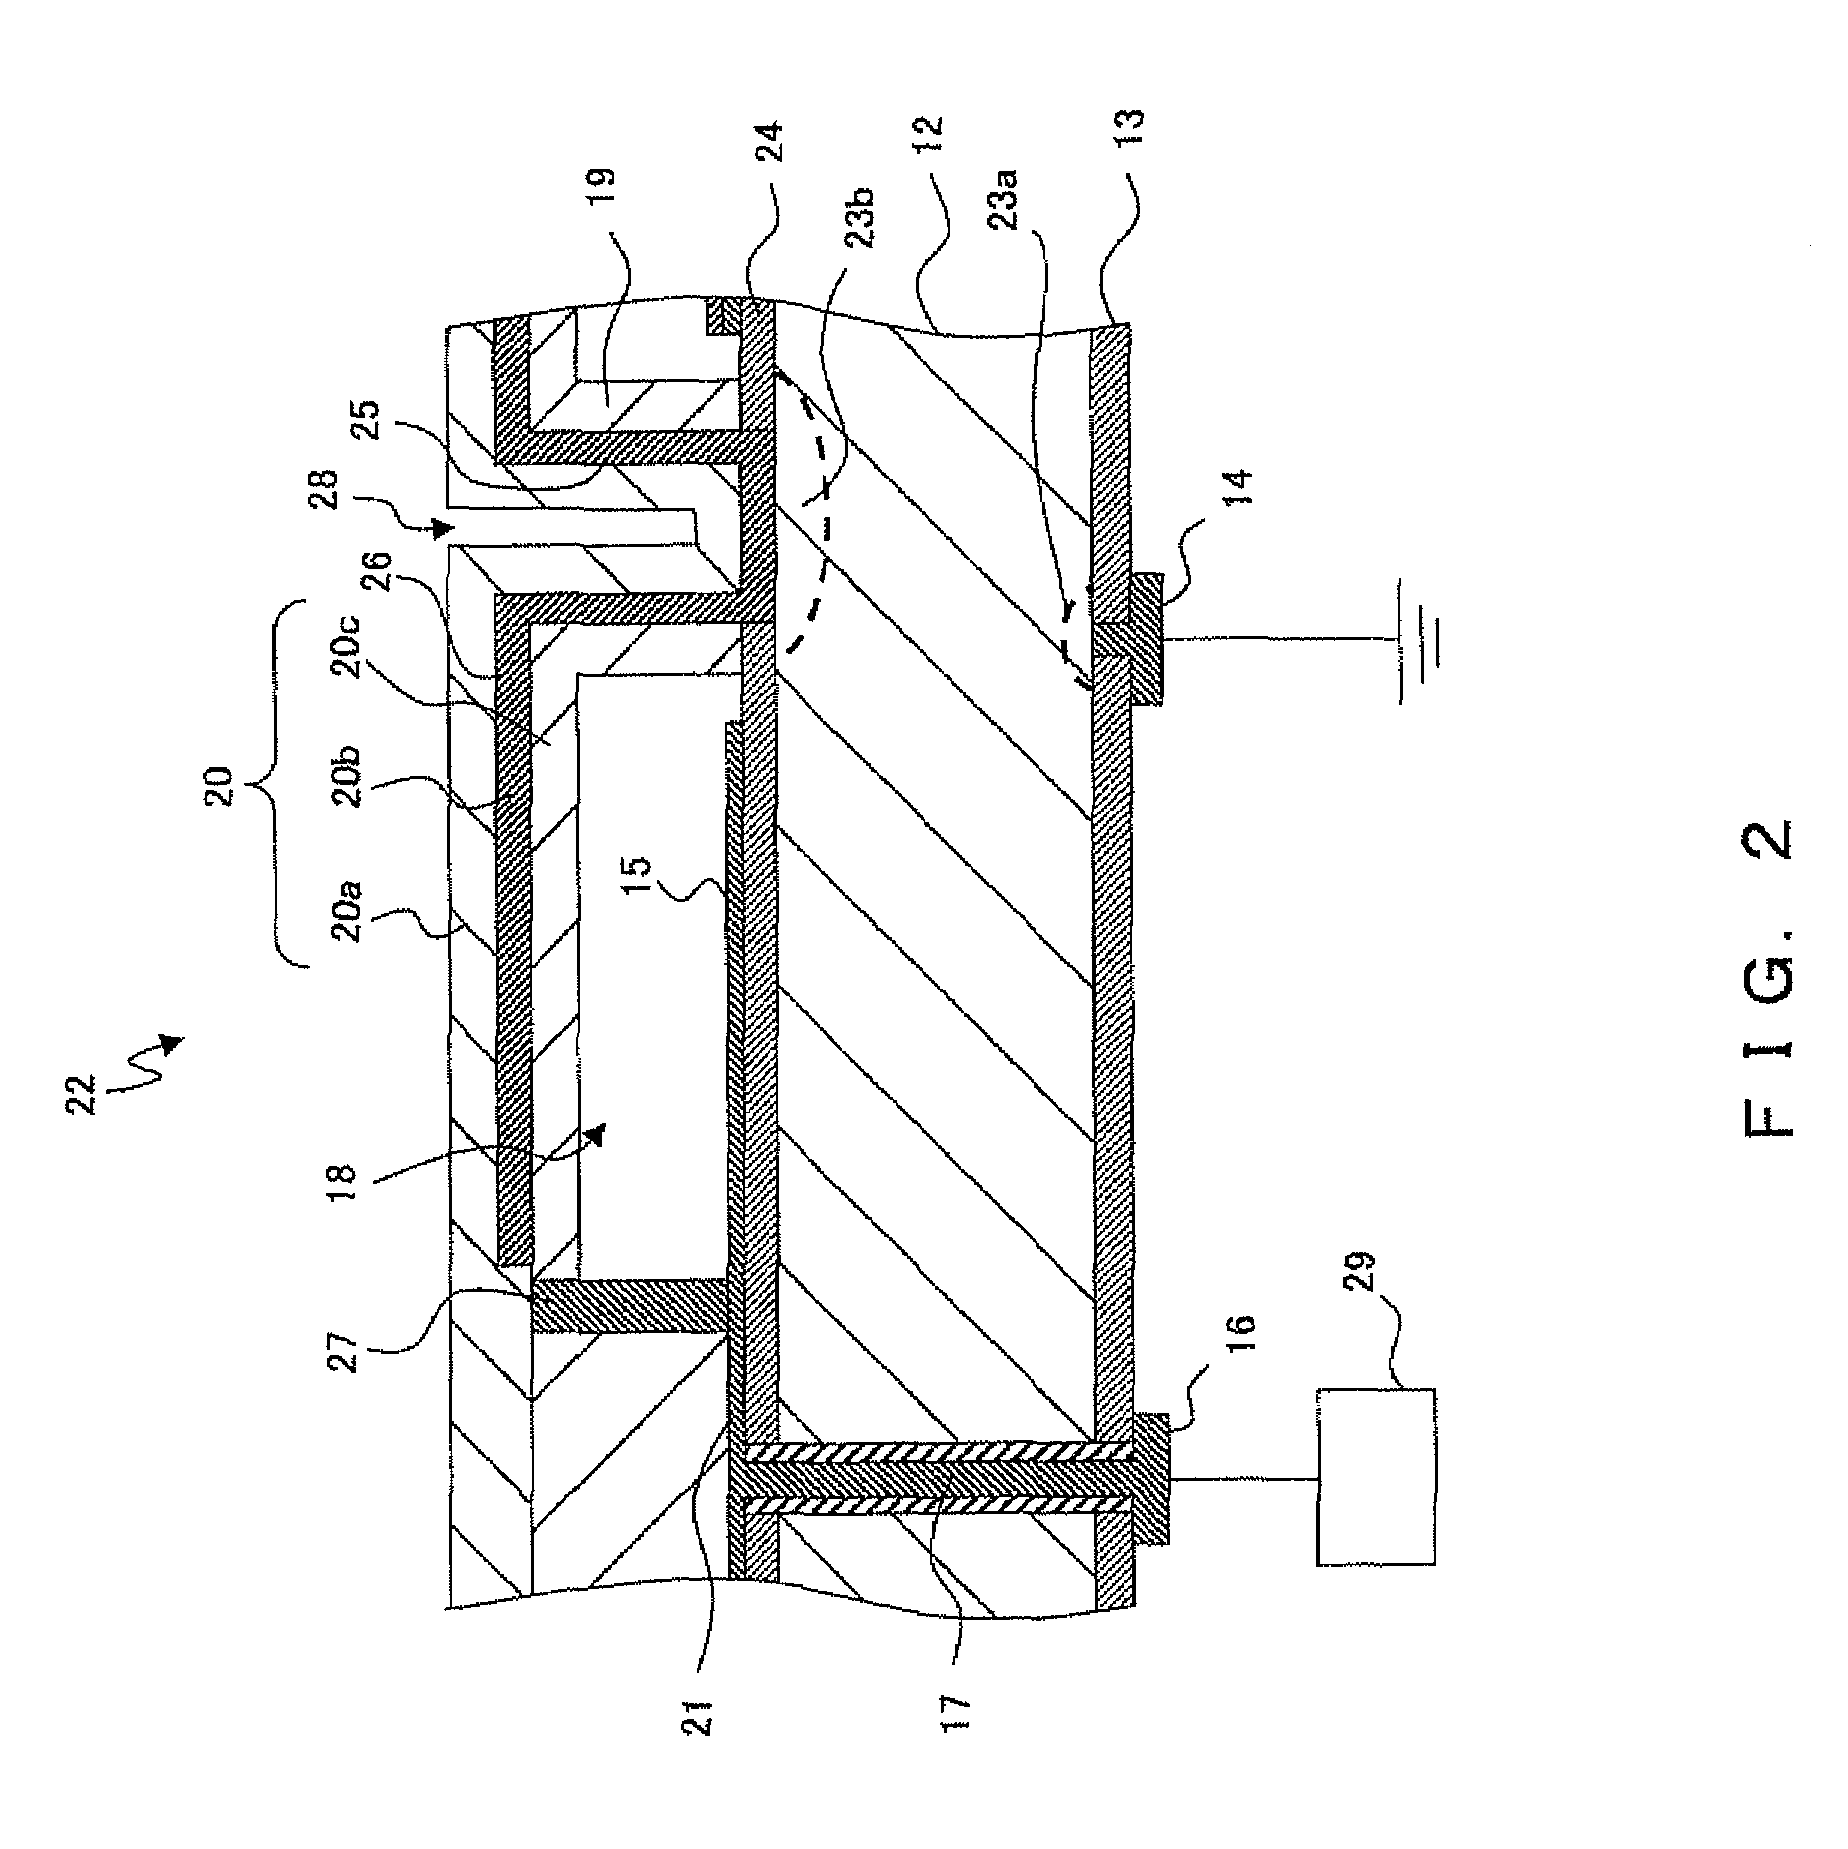 Capacitive micromachined ultrasonic transducer (cMUT) device and in-body-cavity diagnostic ultrasound system